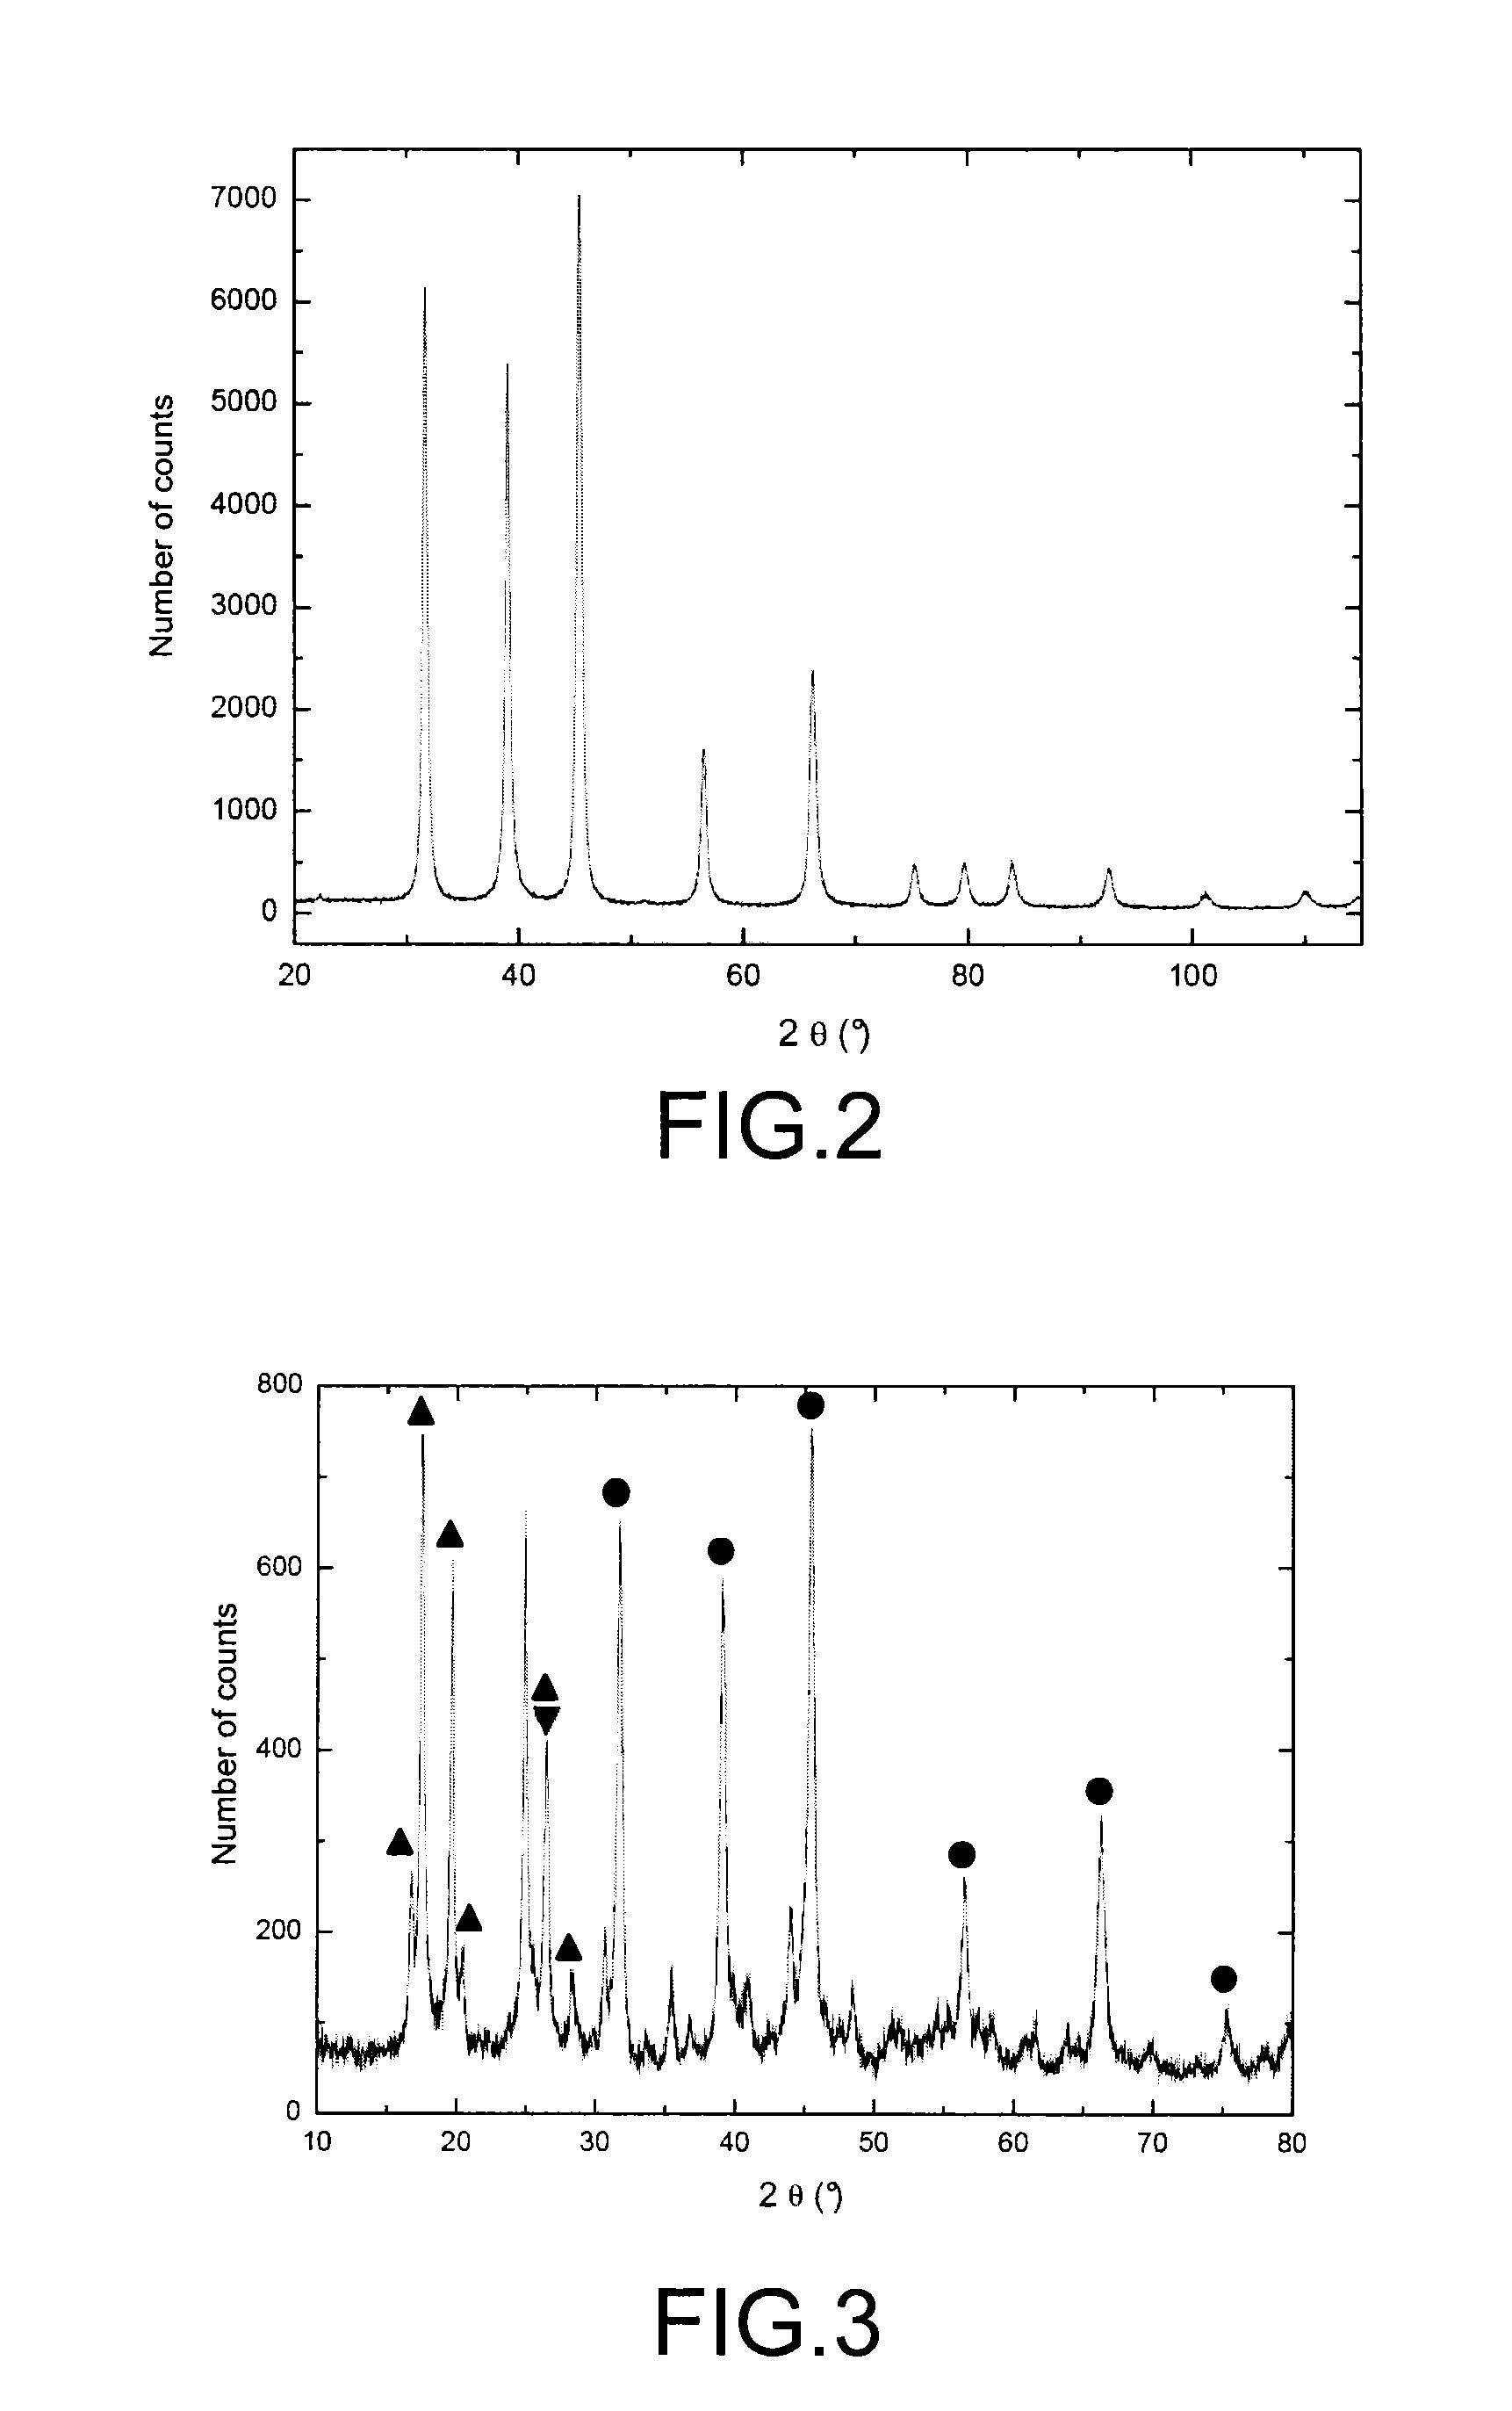 Use of a kmgf3 compound for trapping metals in the form of fluorides and/or oxyfluorides in a gaseous or a liquid phase